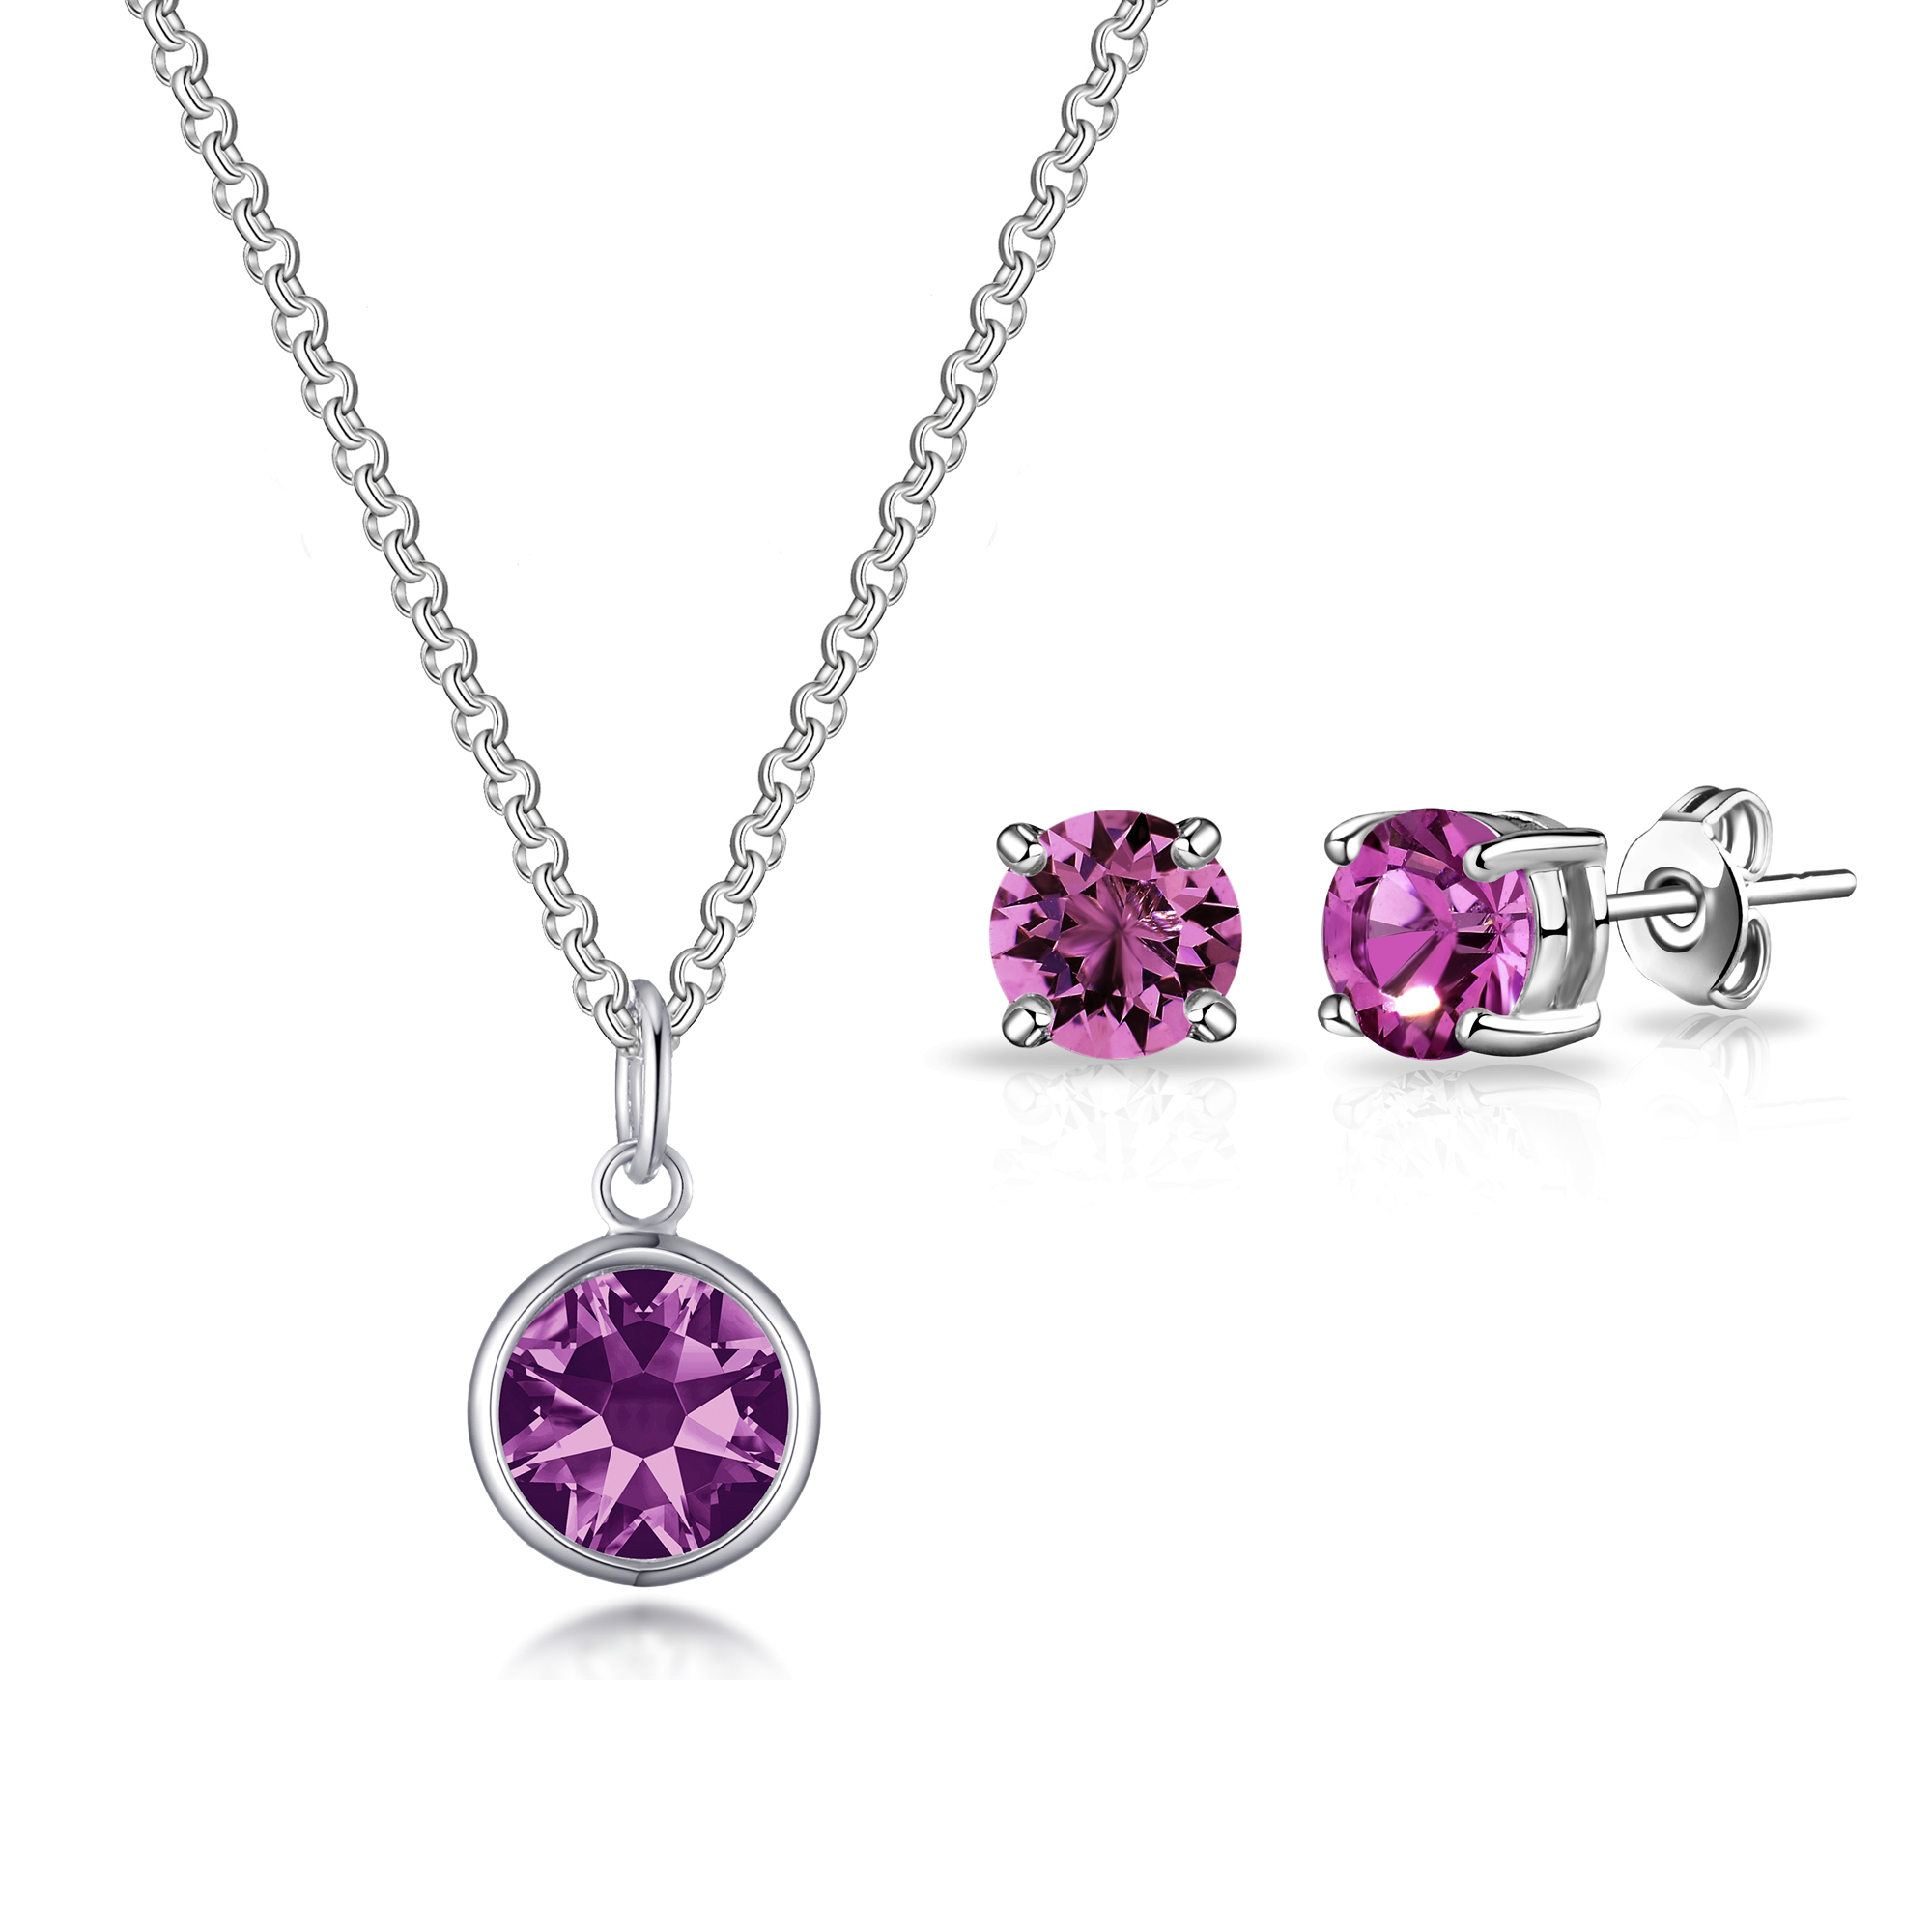 June (Alexandrite) Birthstone Necklace & Earrings Set Created with Zircondia® Crystals